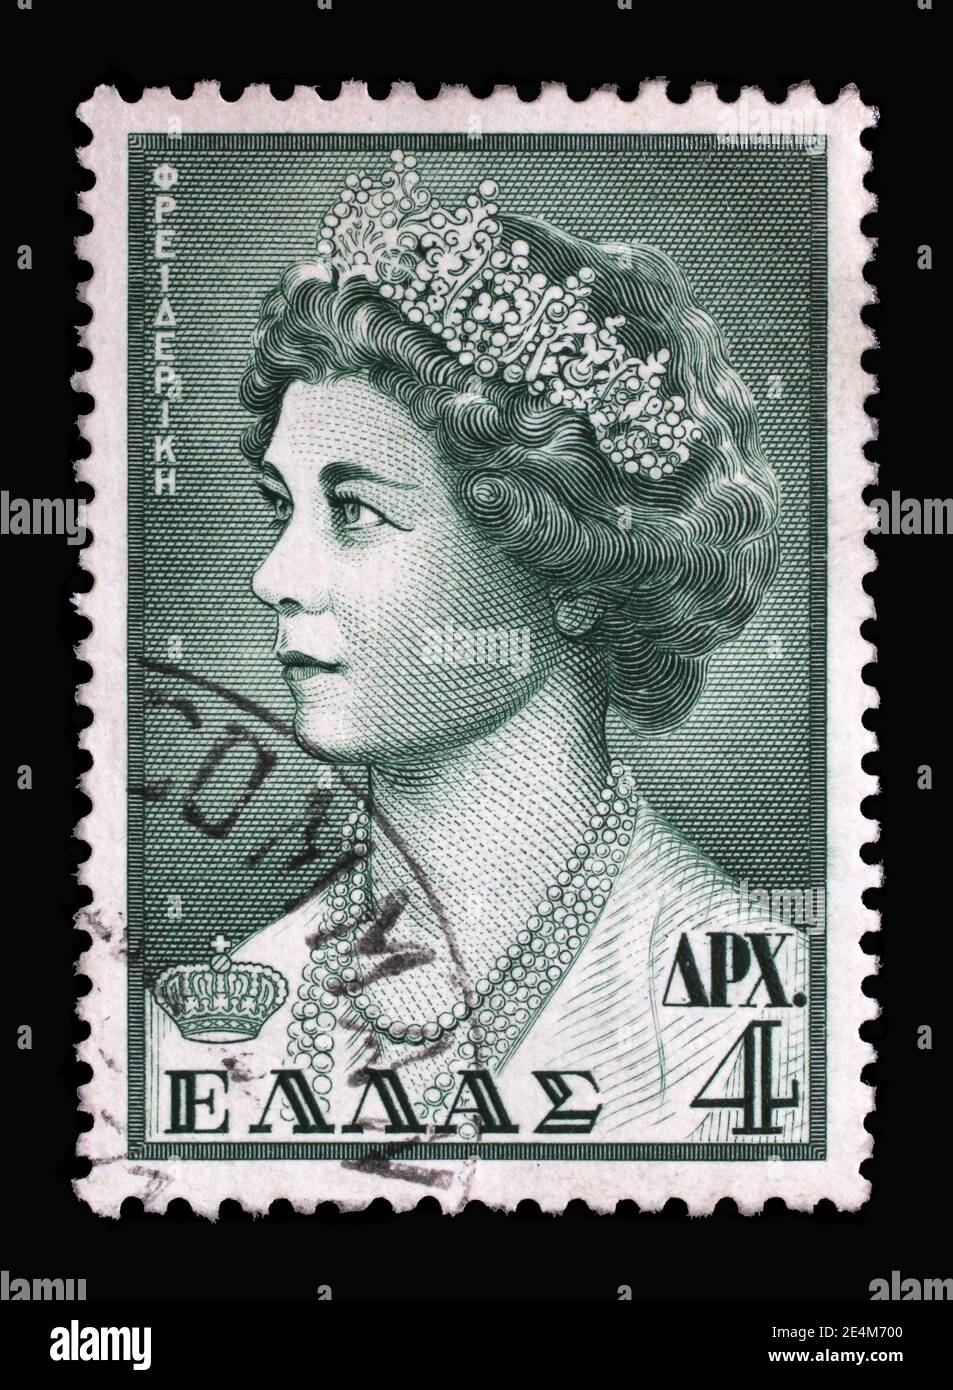 Stamp printed in Greece shows Frederica of Hanover, Queen of Greece from 1947 until 1964 as the wife of King Paul, circa 1956 Stock Photo